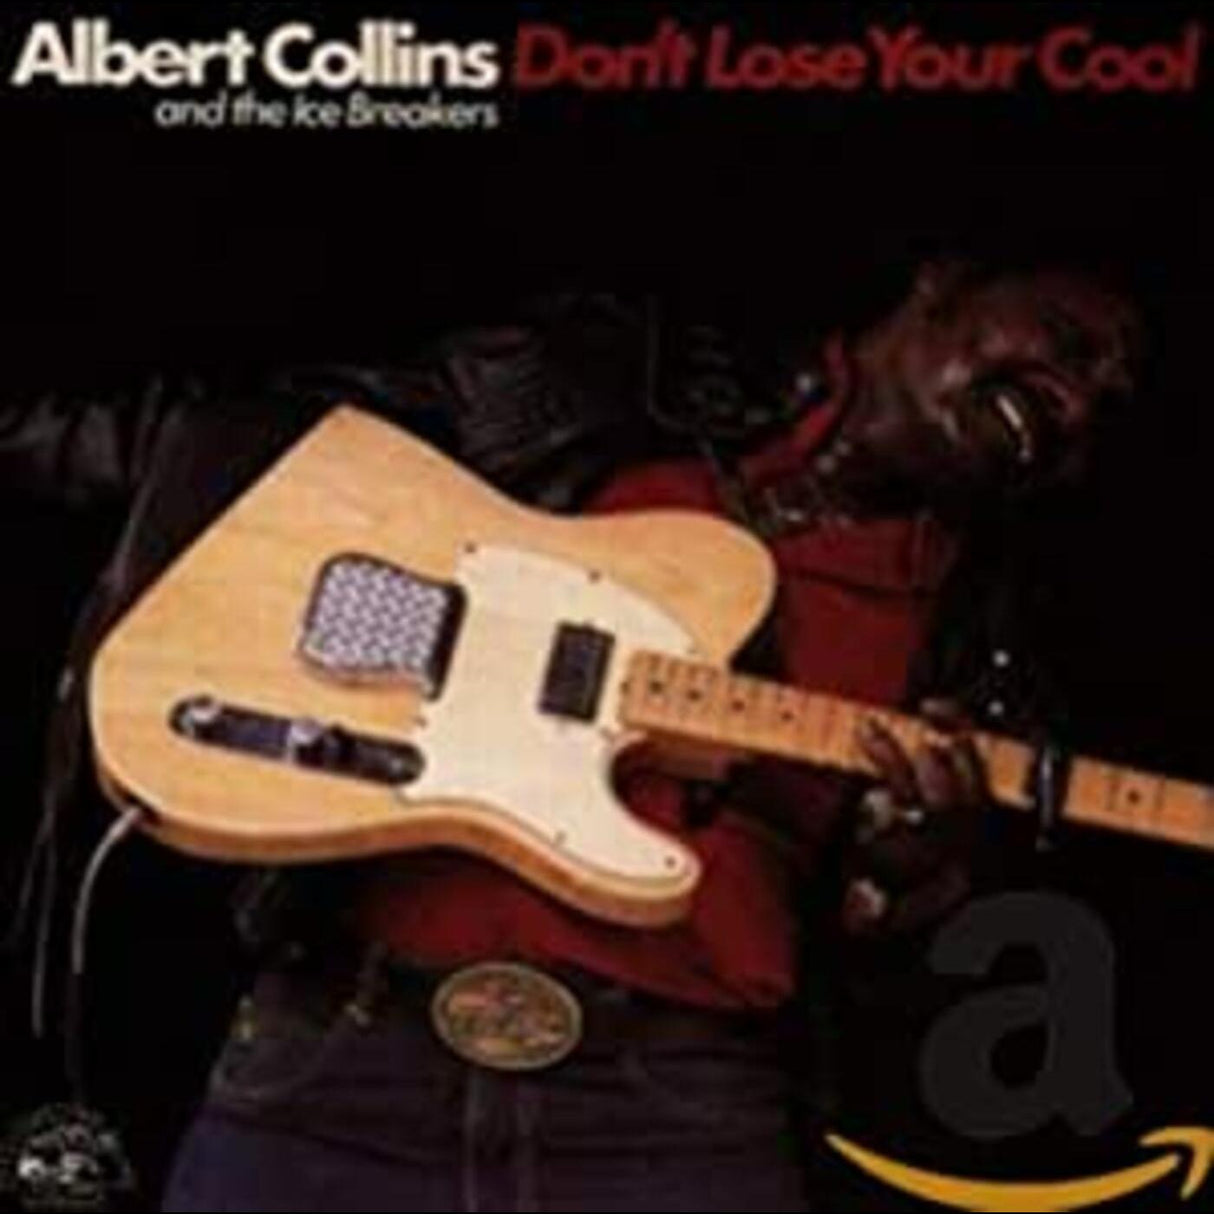 Don't Lose Your Cool [CD]